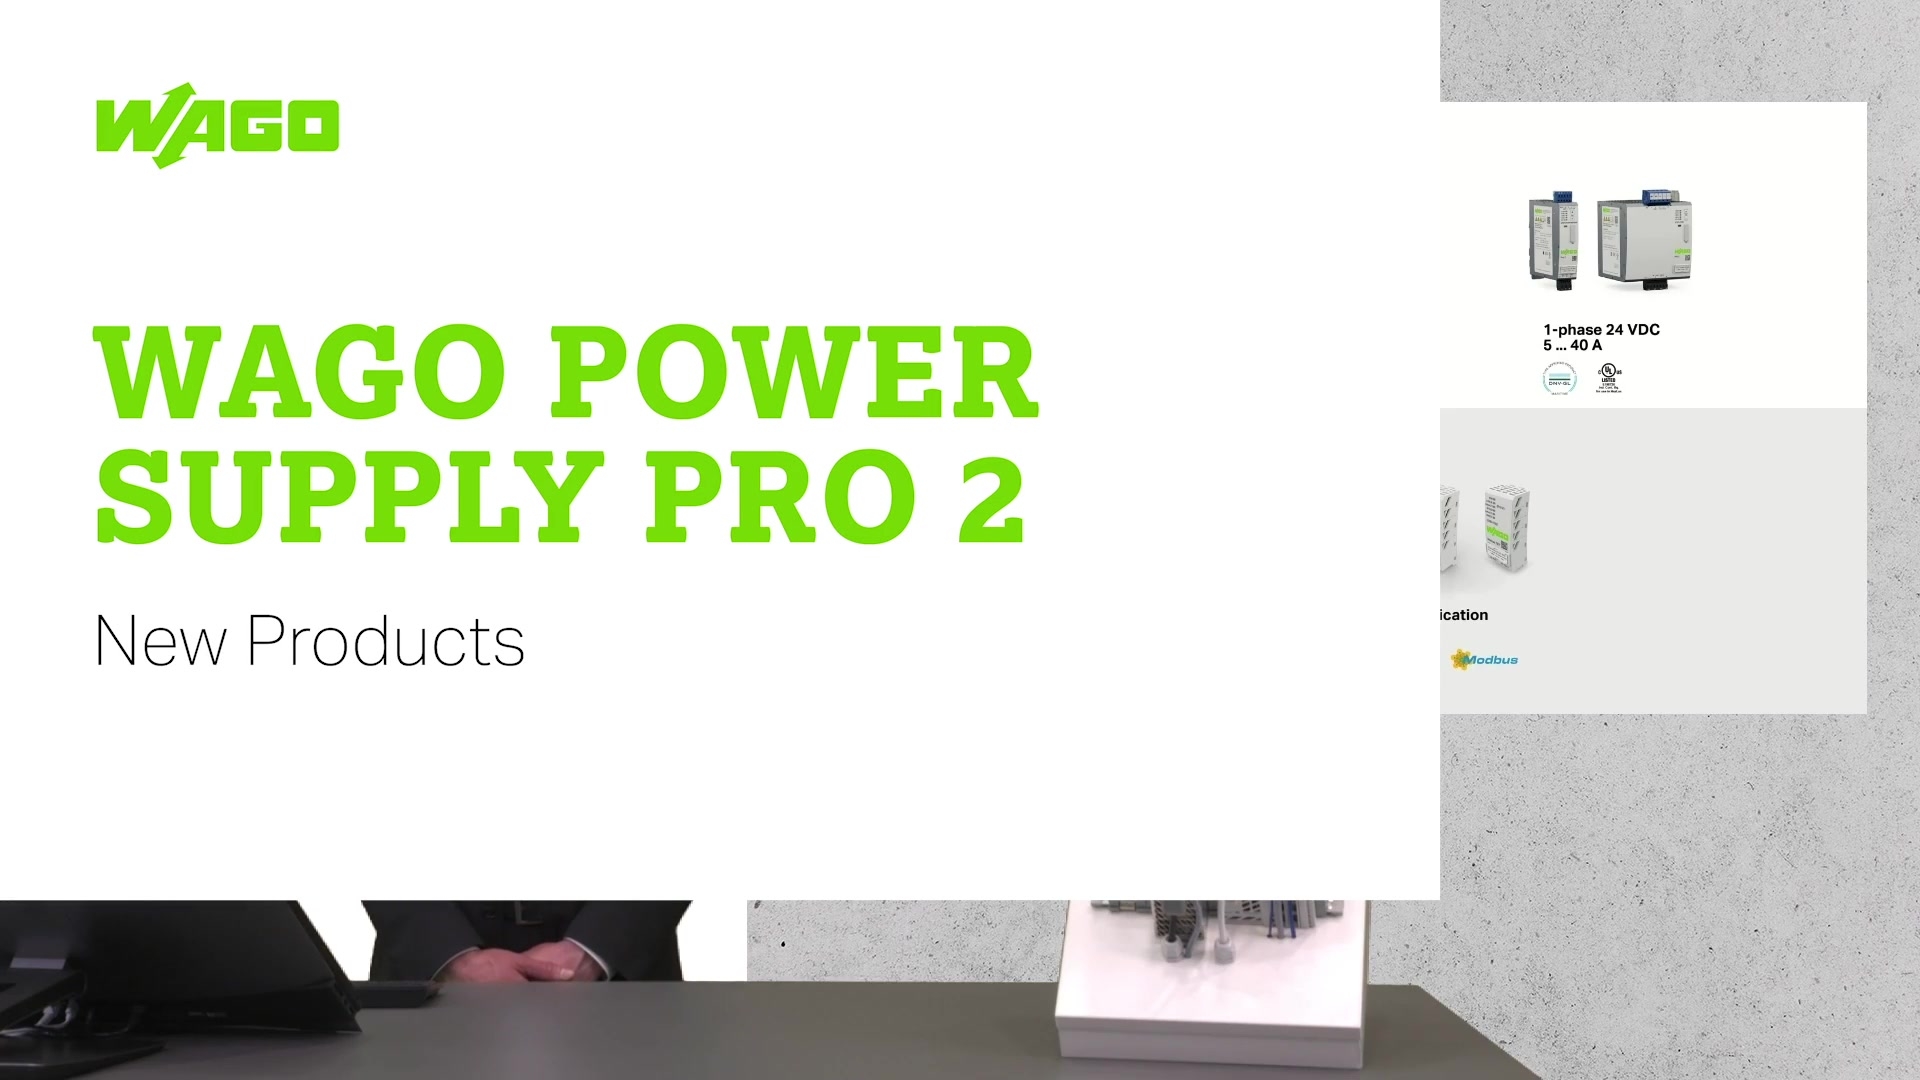 The WAGO Pro 2 Power Supply - New Products